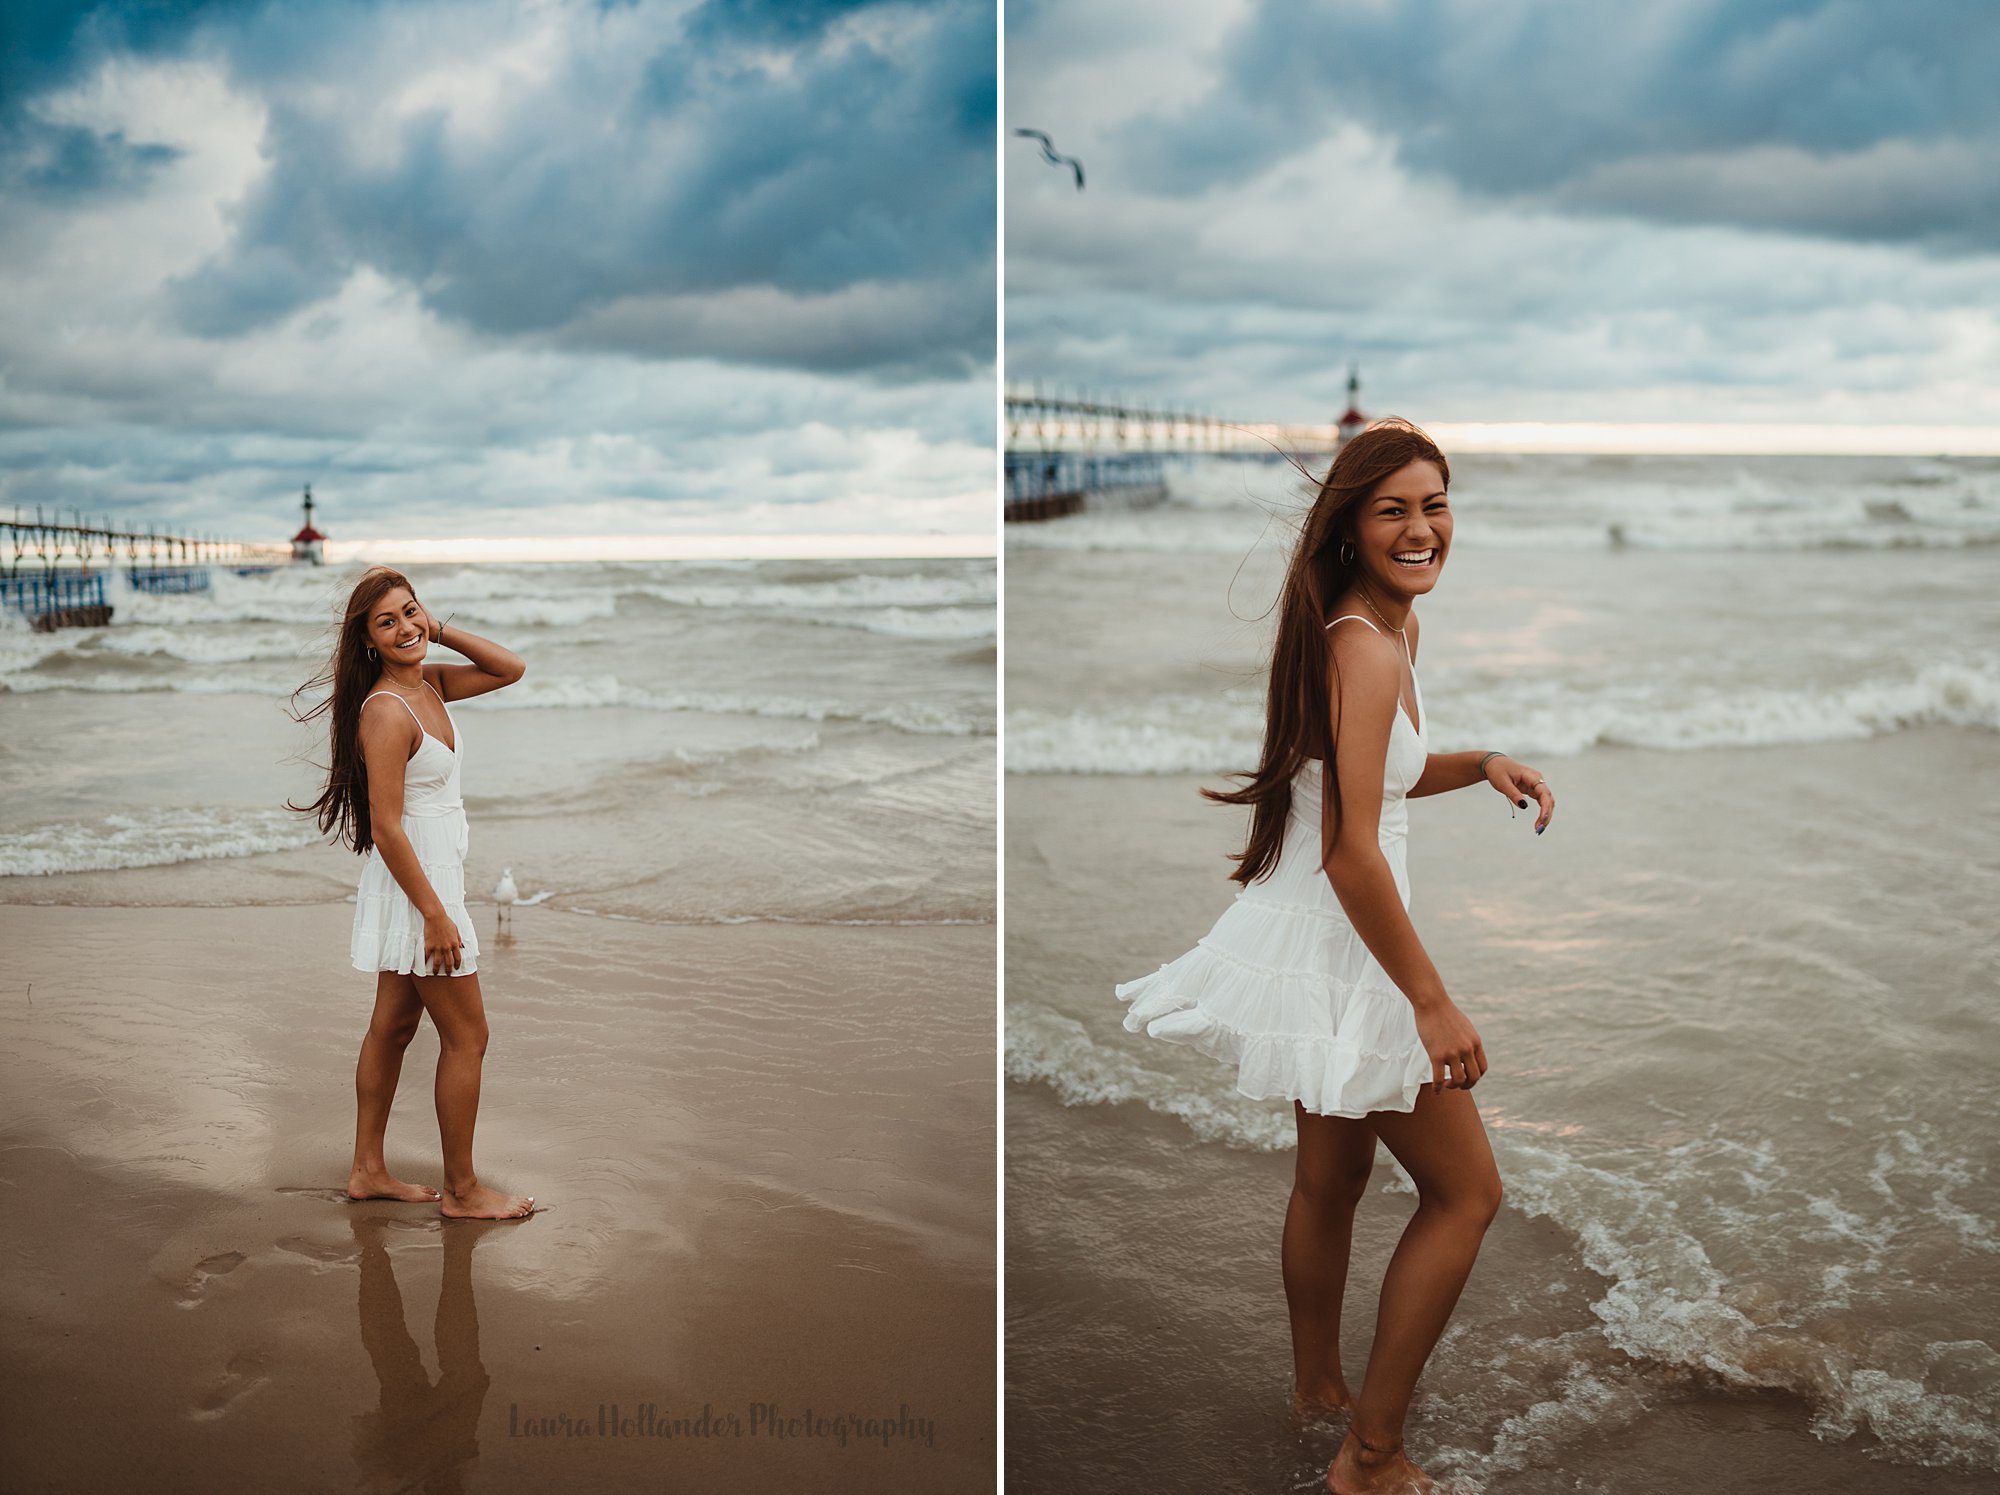 senior beach session in St. Joesph, MI with Laura Hollander Photography, windy beach session